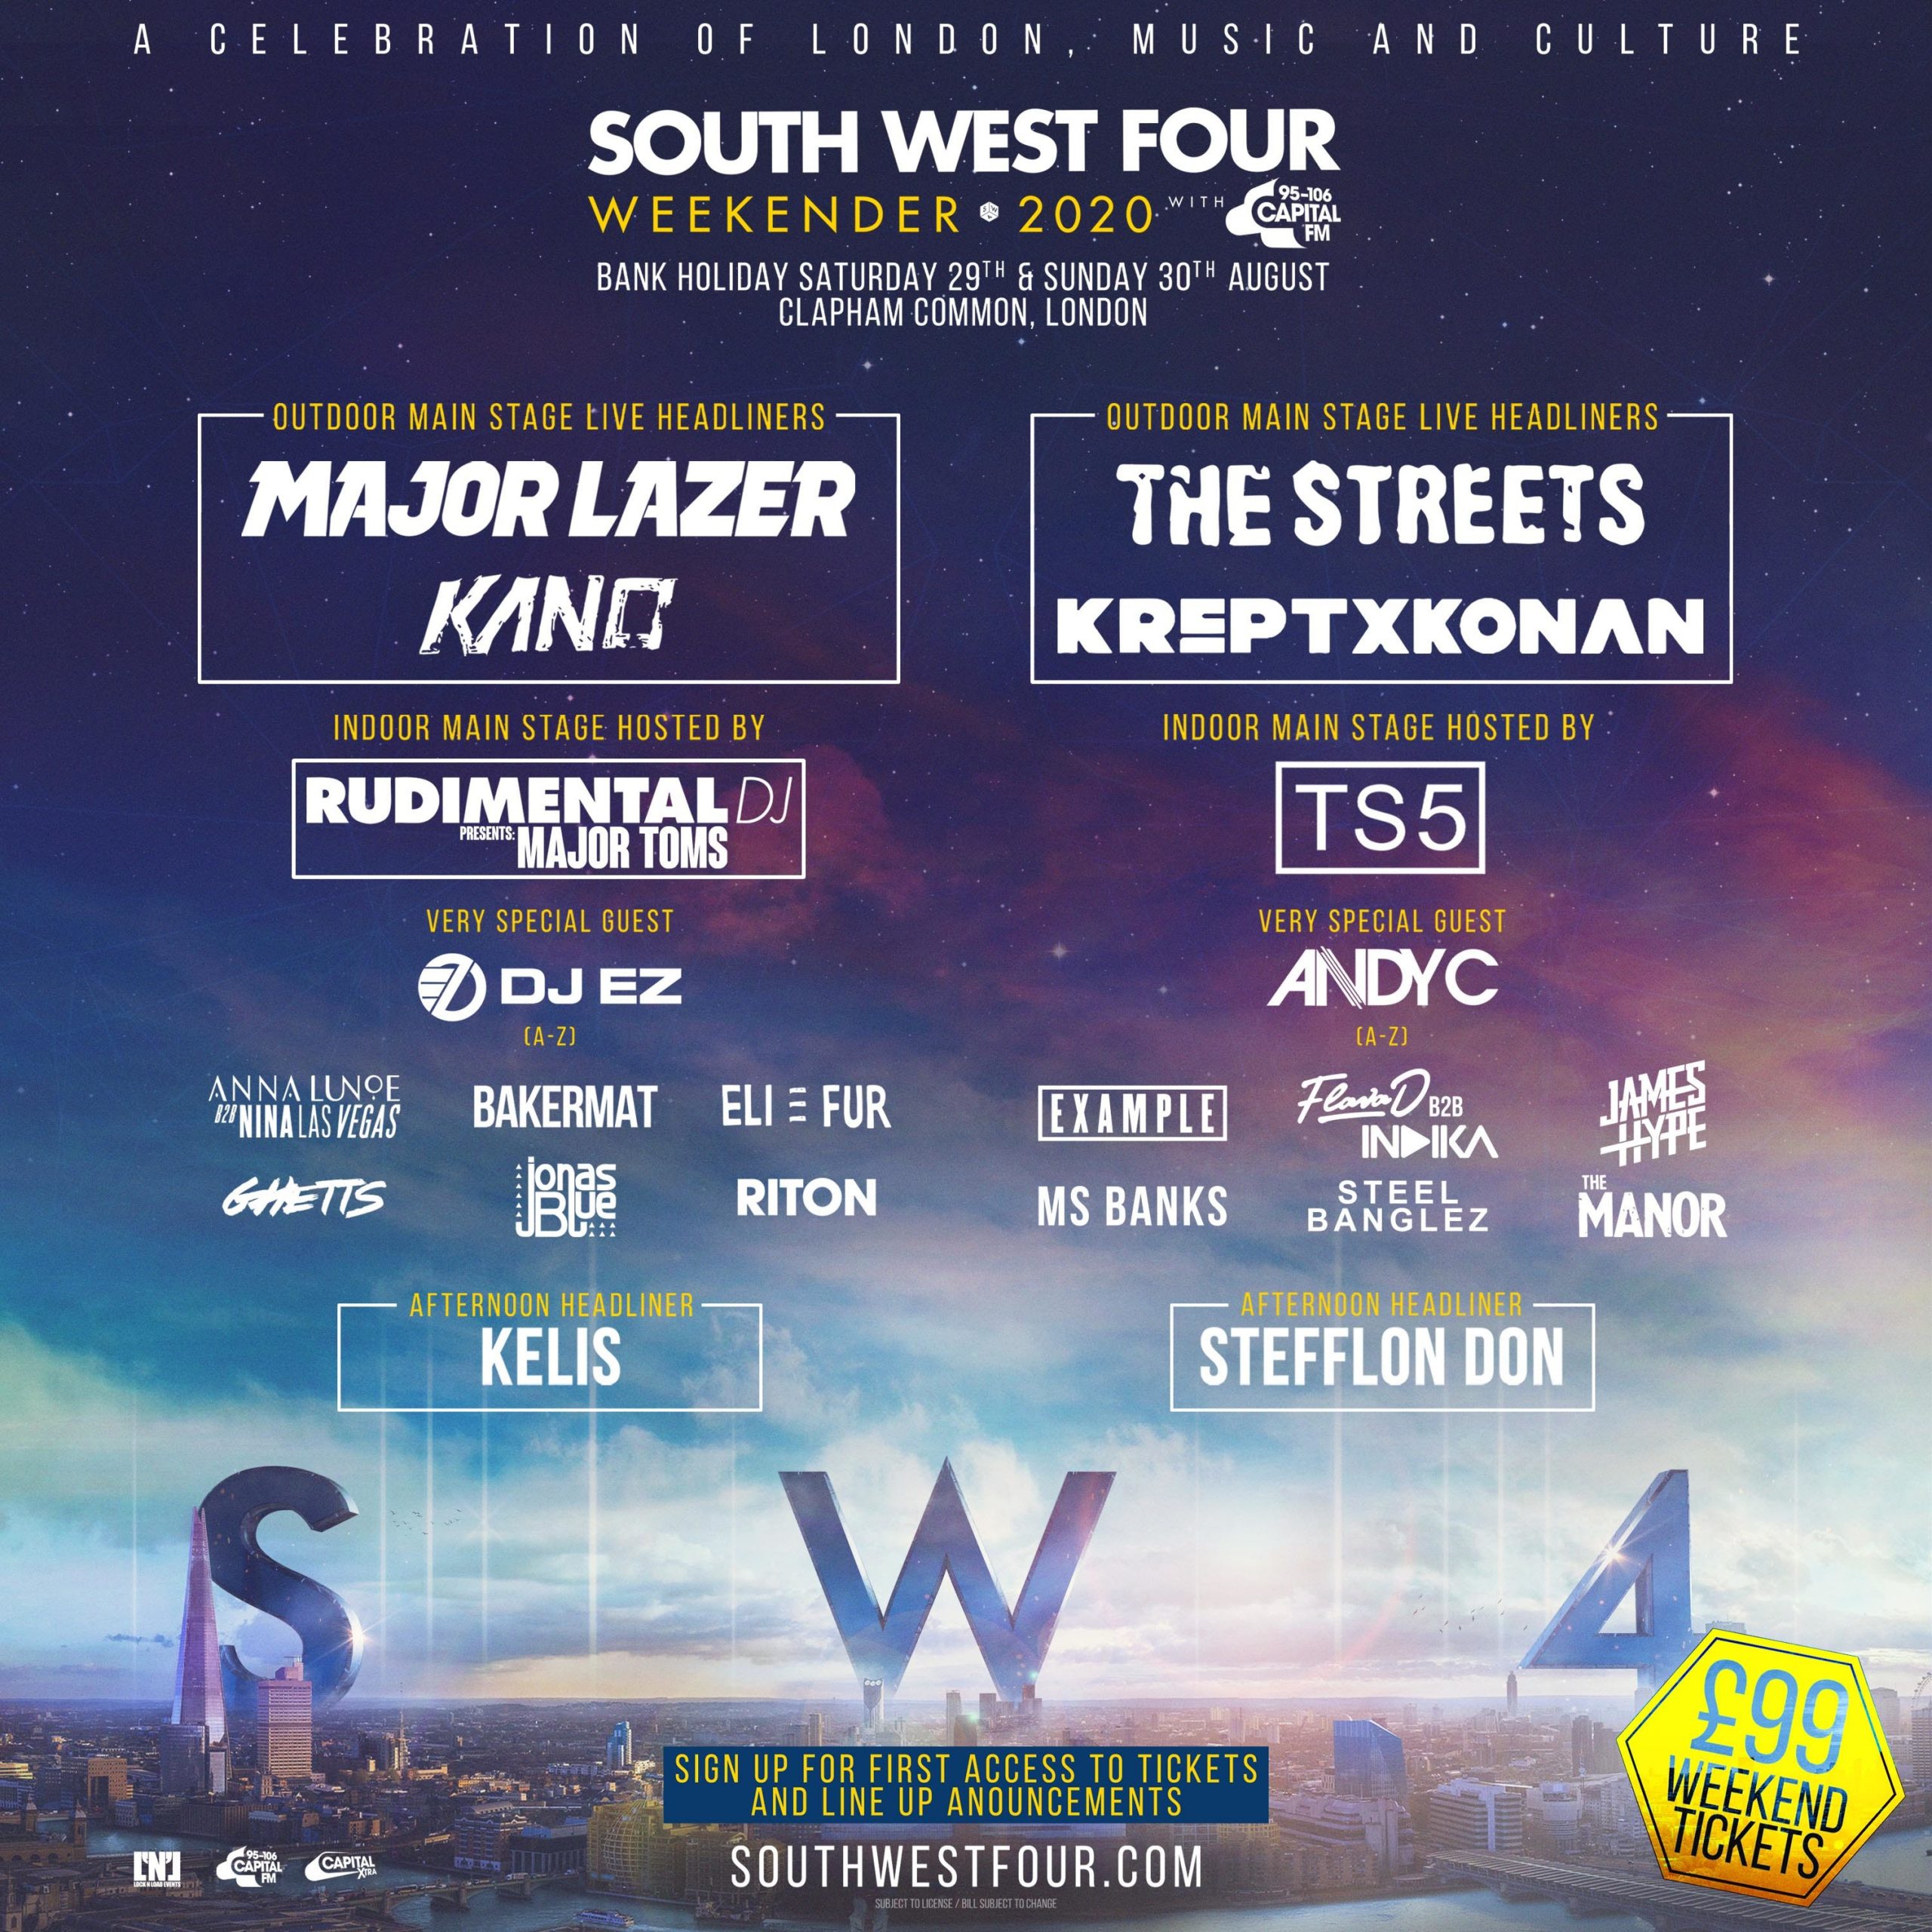 Lineup for South West Four (SW4) festival 2020